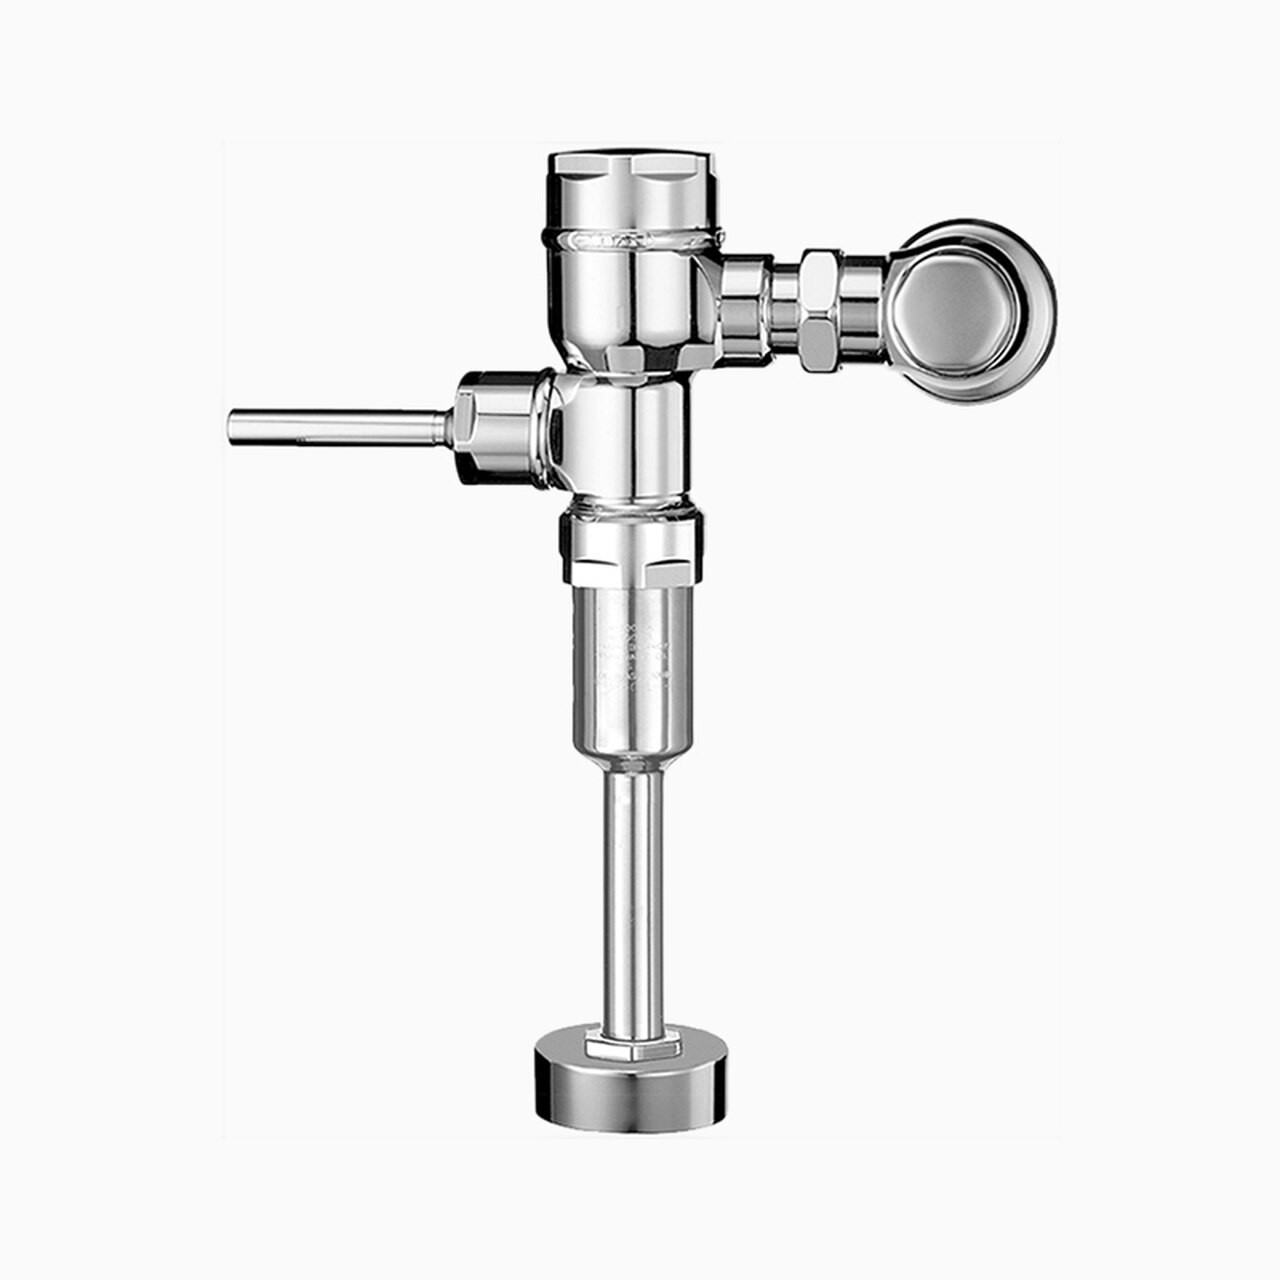 SLOAN 3322642 CROWN II 186-1 PVDSF 1.0 GPF TOP SPUD SINGLE FLUSH EXPOSED MANUAL URINAL FLUSHOMETER - BRUSHED STAINLESS